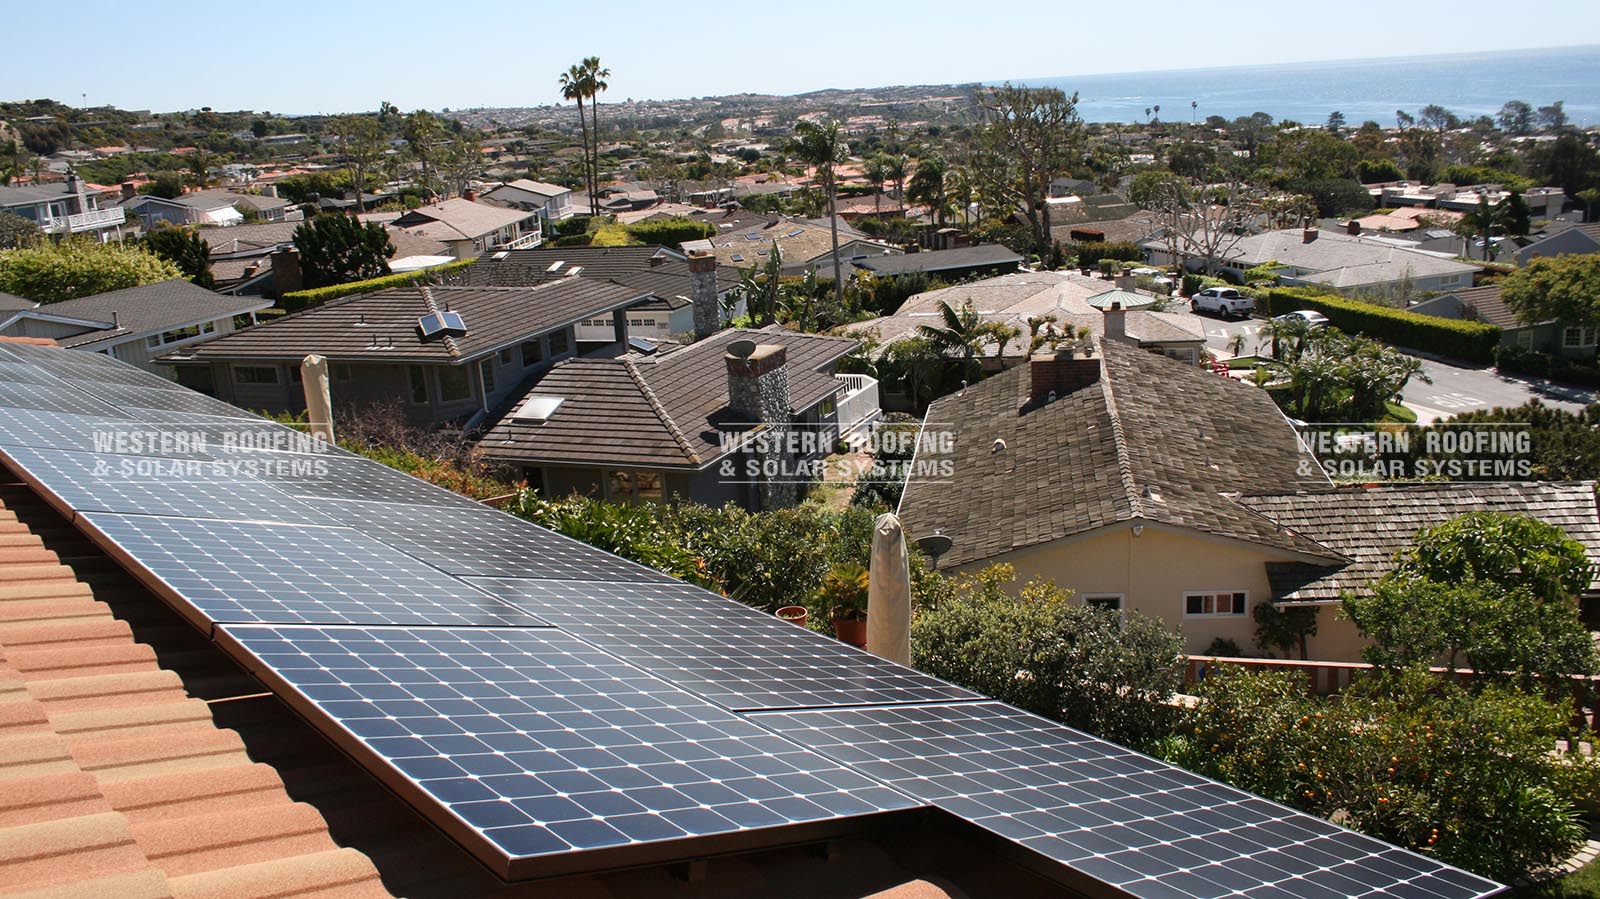 california-solar-roof-systems-metal-roof-and-solar-system-specialist